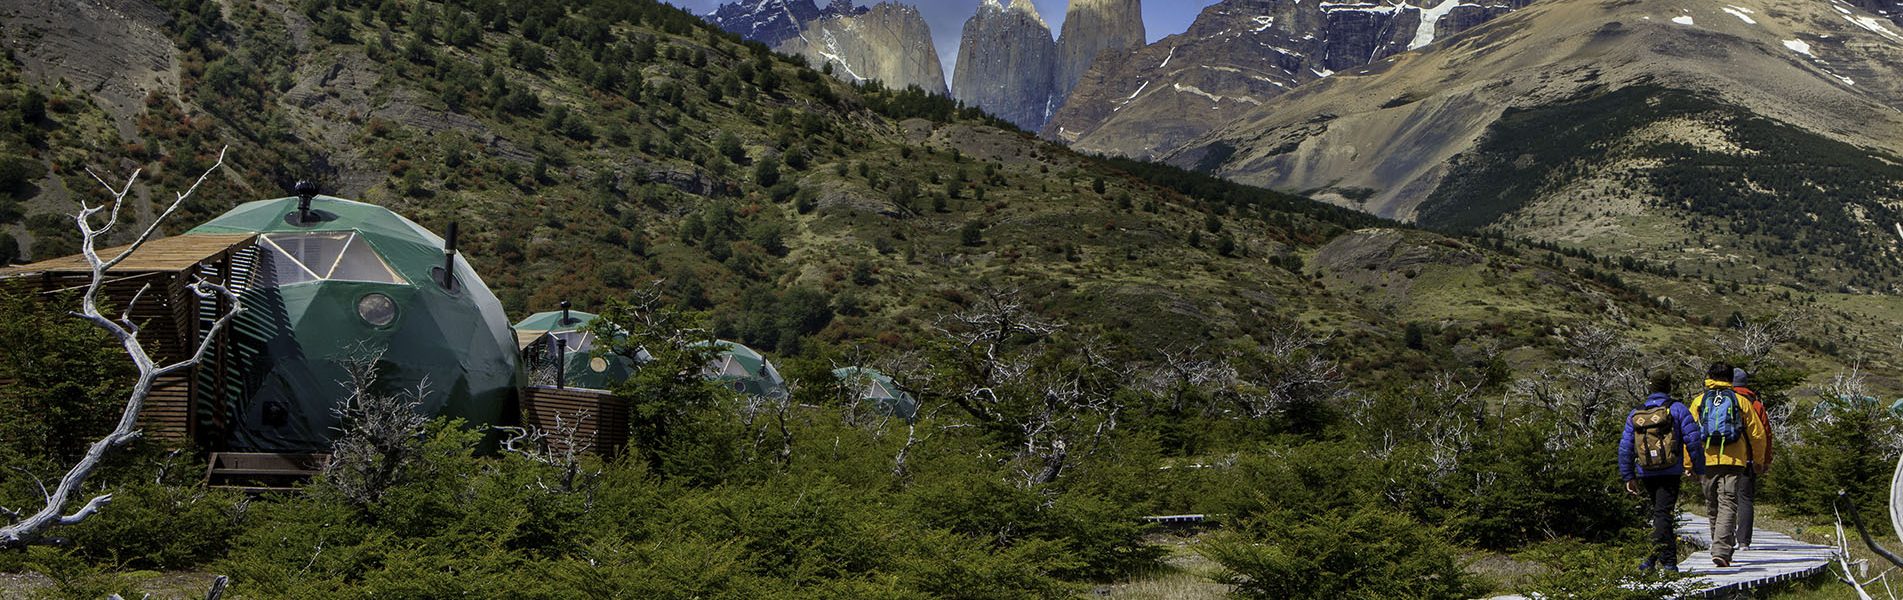 The Ecotourism Industry: Contextualizing Endogenous Place-Making in Patagonia- By Vassiliki Mancoridis